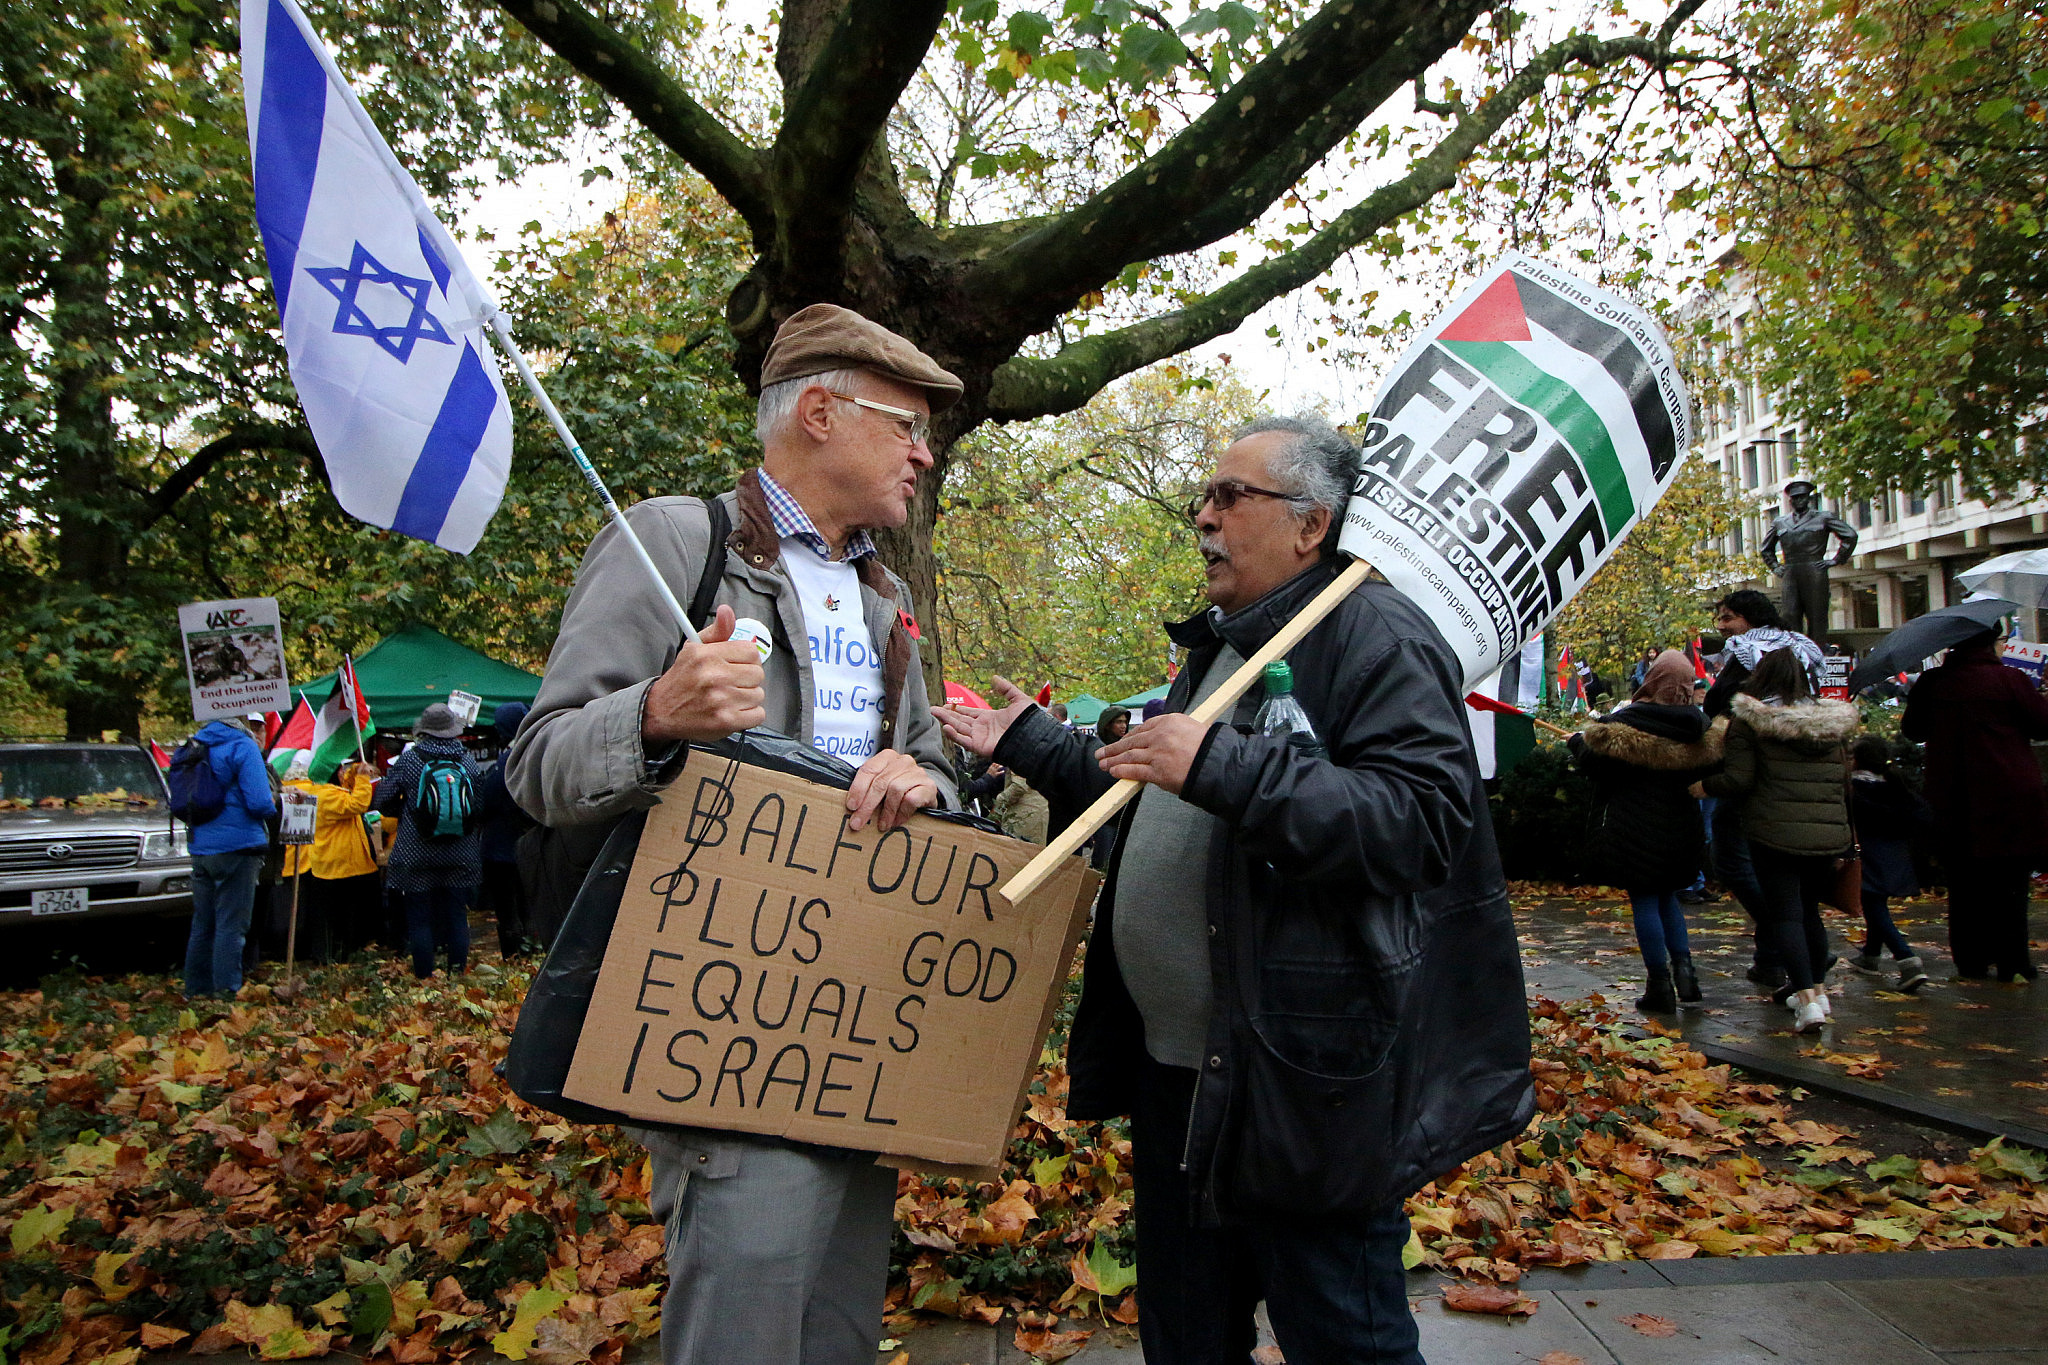 Pro-Israel and pro-Palestine protesters face off as thousands march in the streets of London against the celebration of the 100th anniversary for the Balfour Declaration, with Israeli Prime Minister Benjamin Netanyahu joining the event, November 4, 2017. (Ahmad Al-Bazz/Activestills)